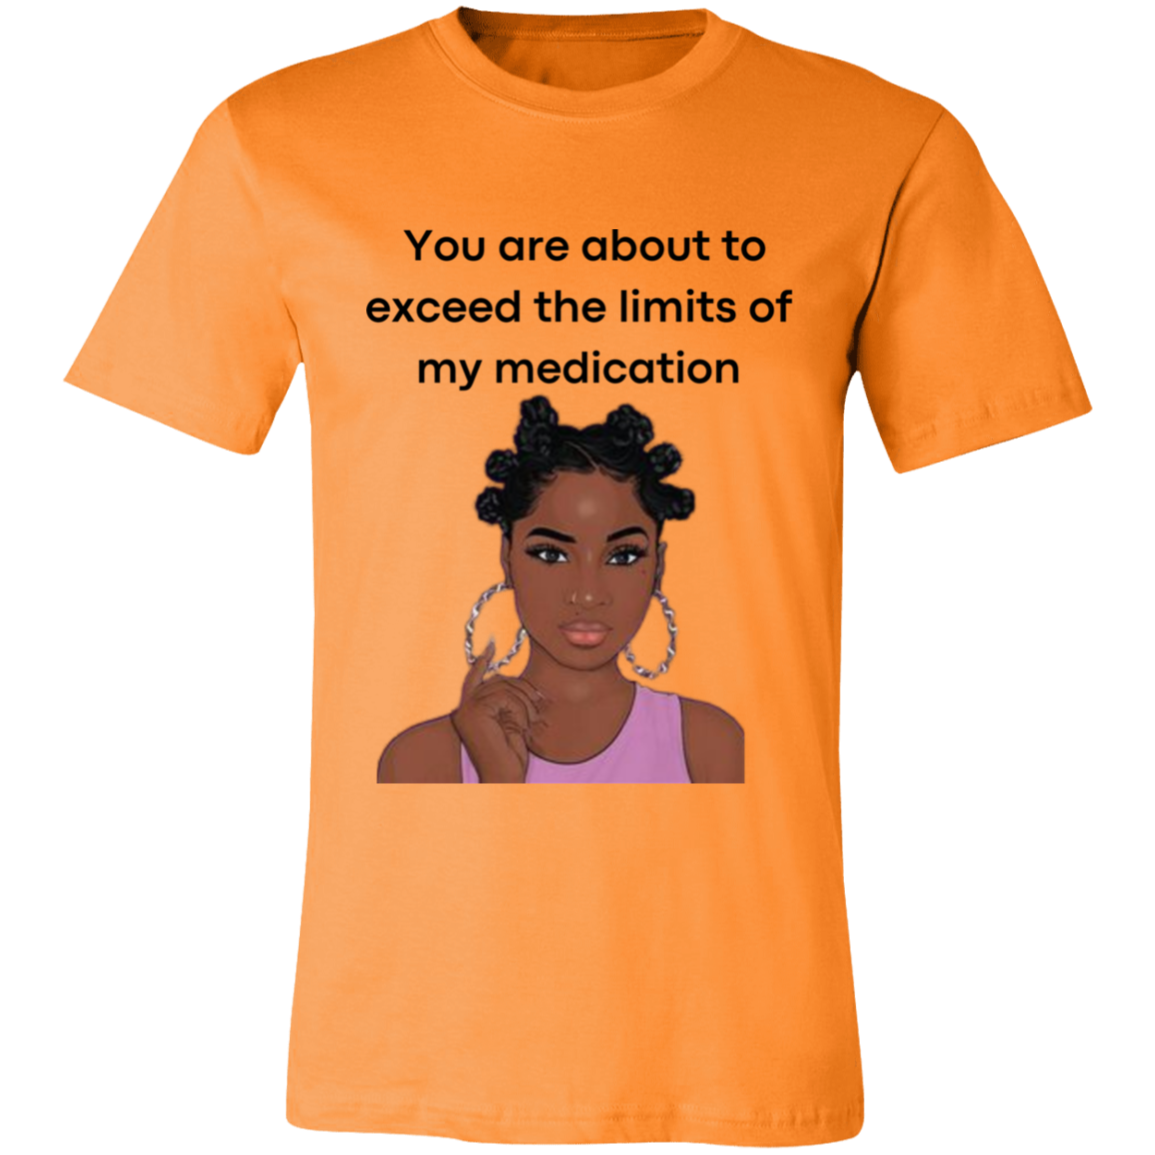 You Are About to Exceed the Limits of My Medication Ladies Jersey Short-Sleeve T-Shirt